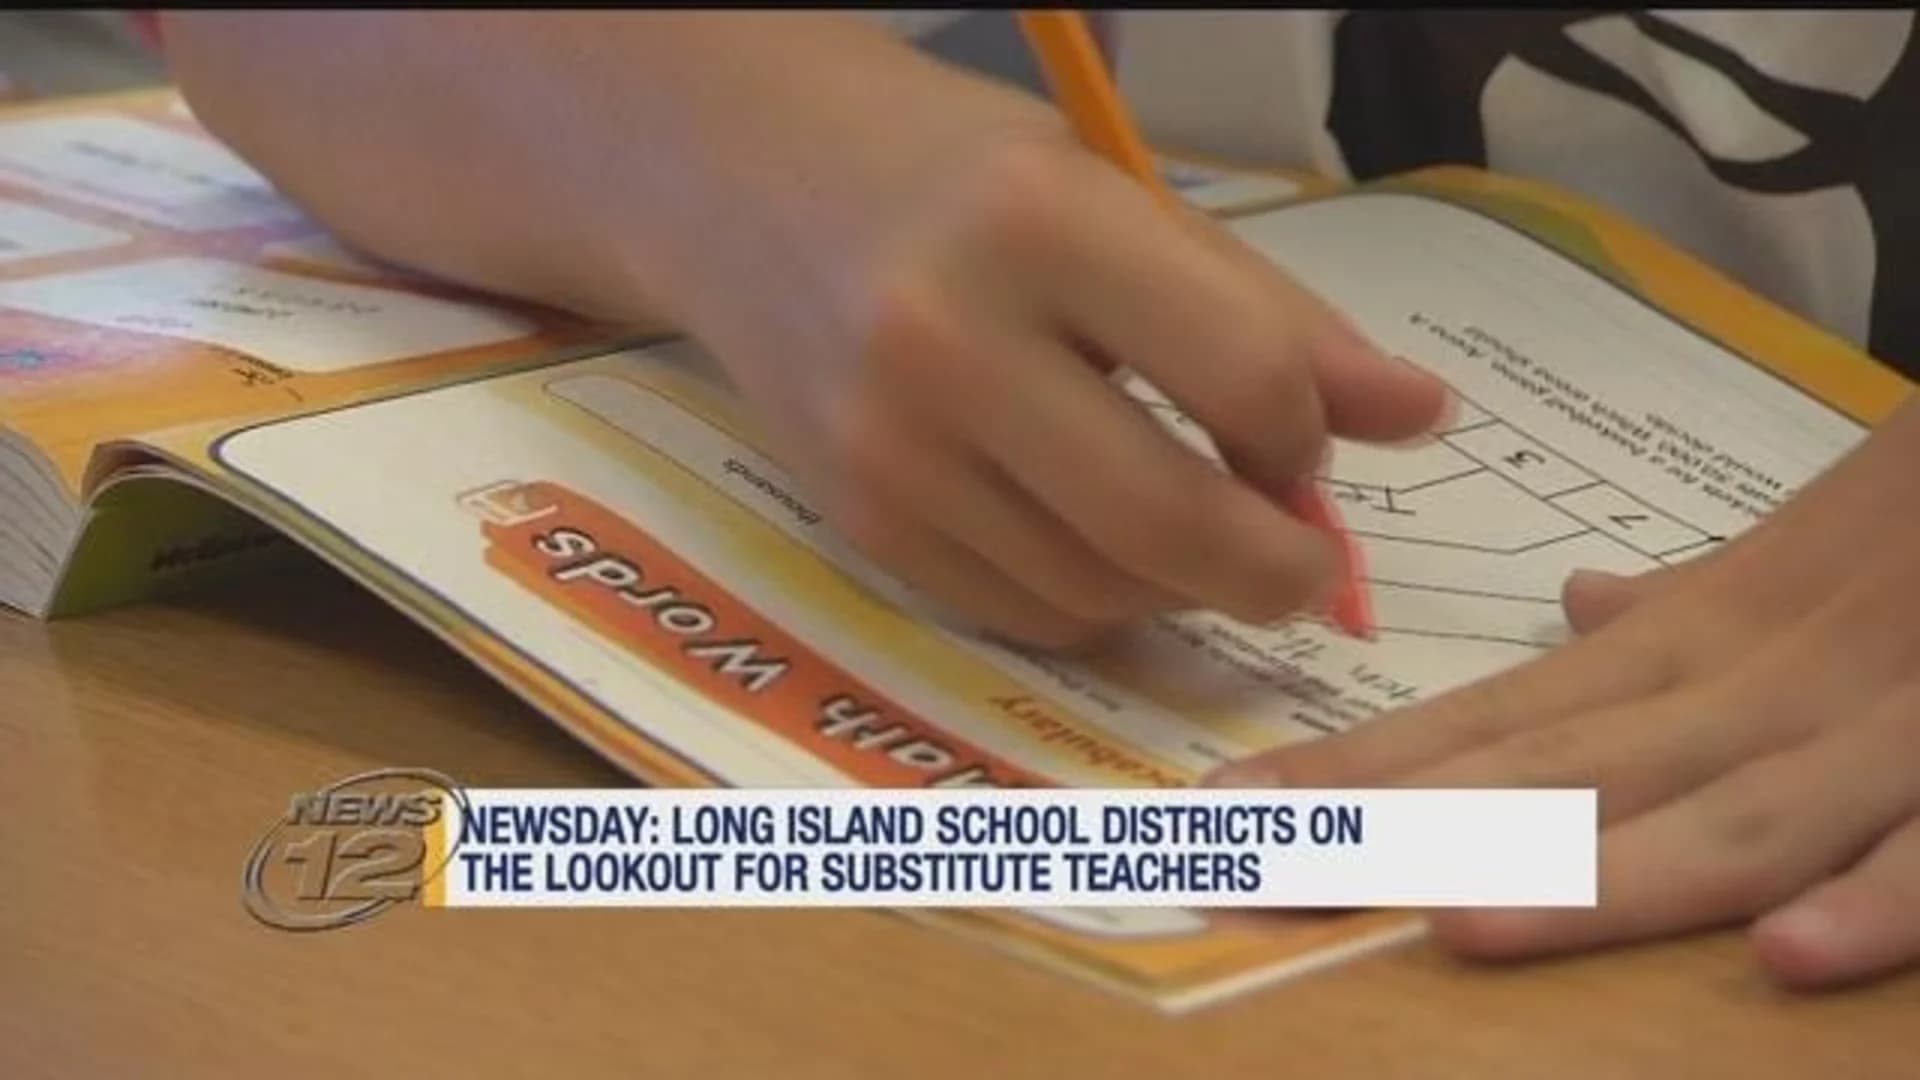 Newsday: Long Island school districts looking for substitute teachers